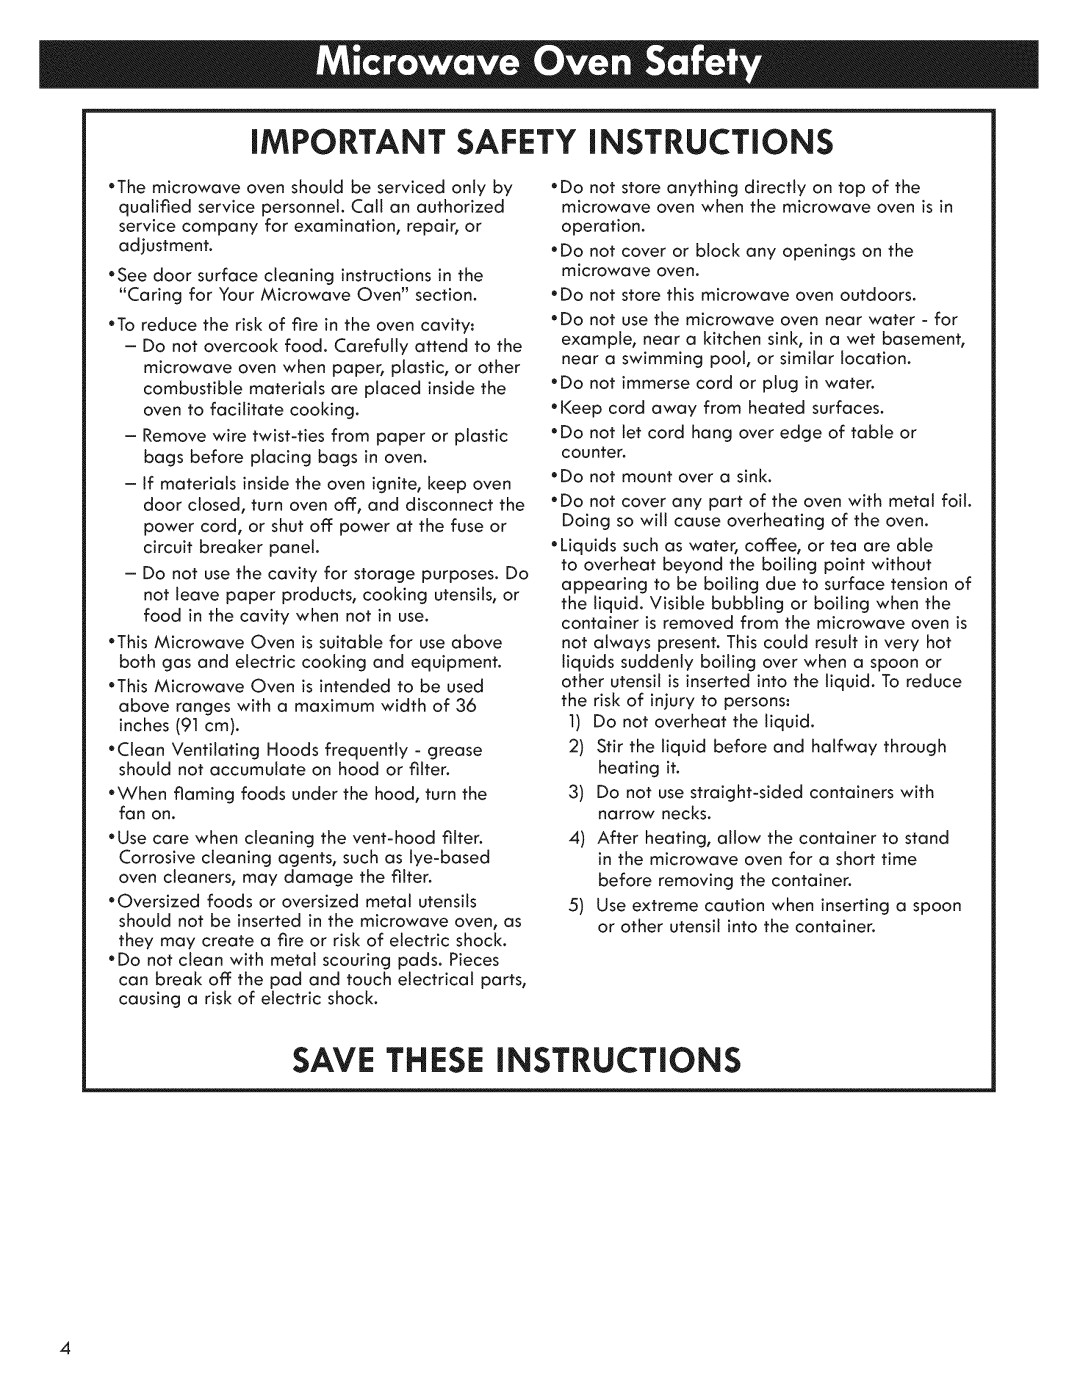 Kenmore 721.7915 manual iMPORTANT SAFETY iNSTRUCTiONS, Save These Instructions 